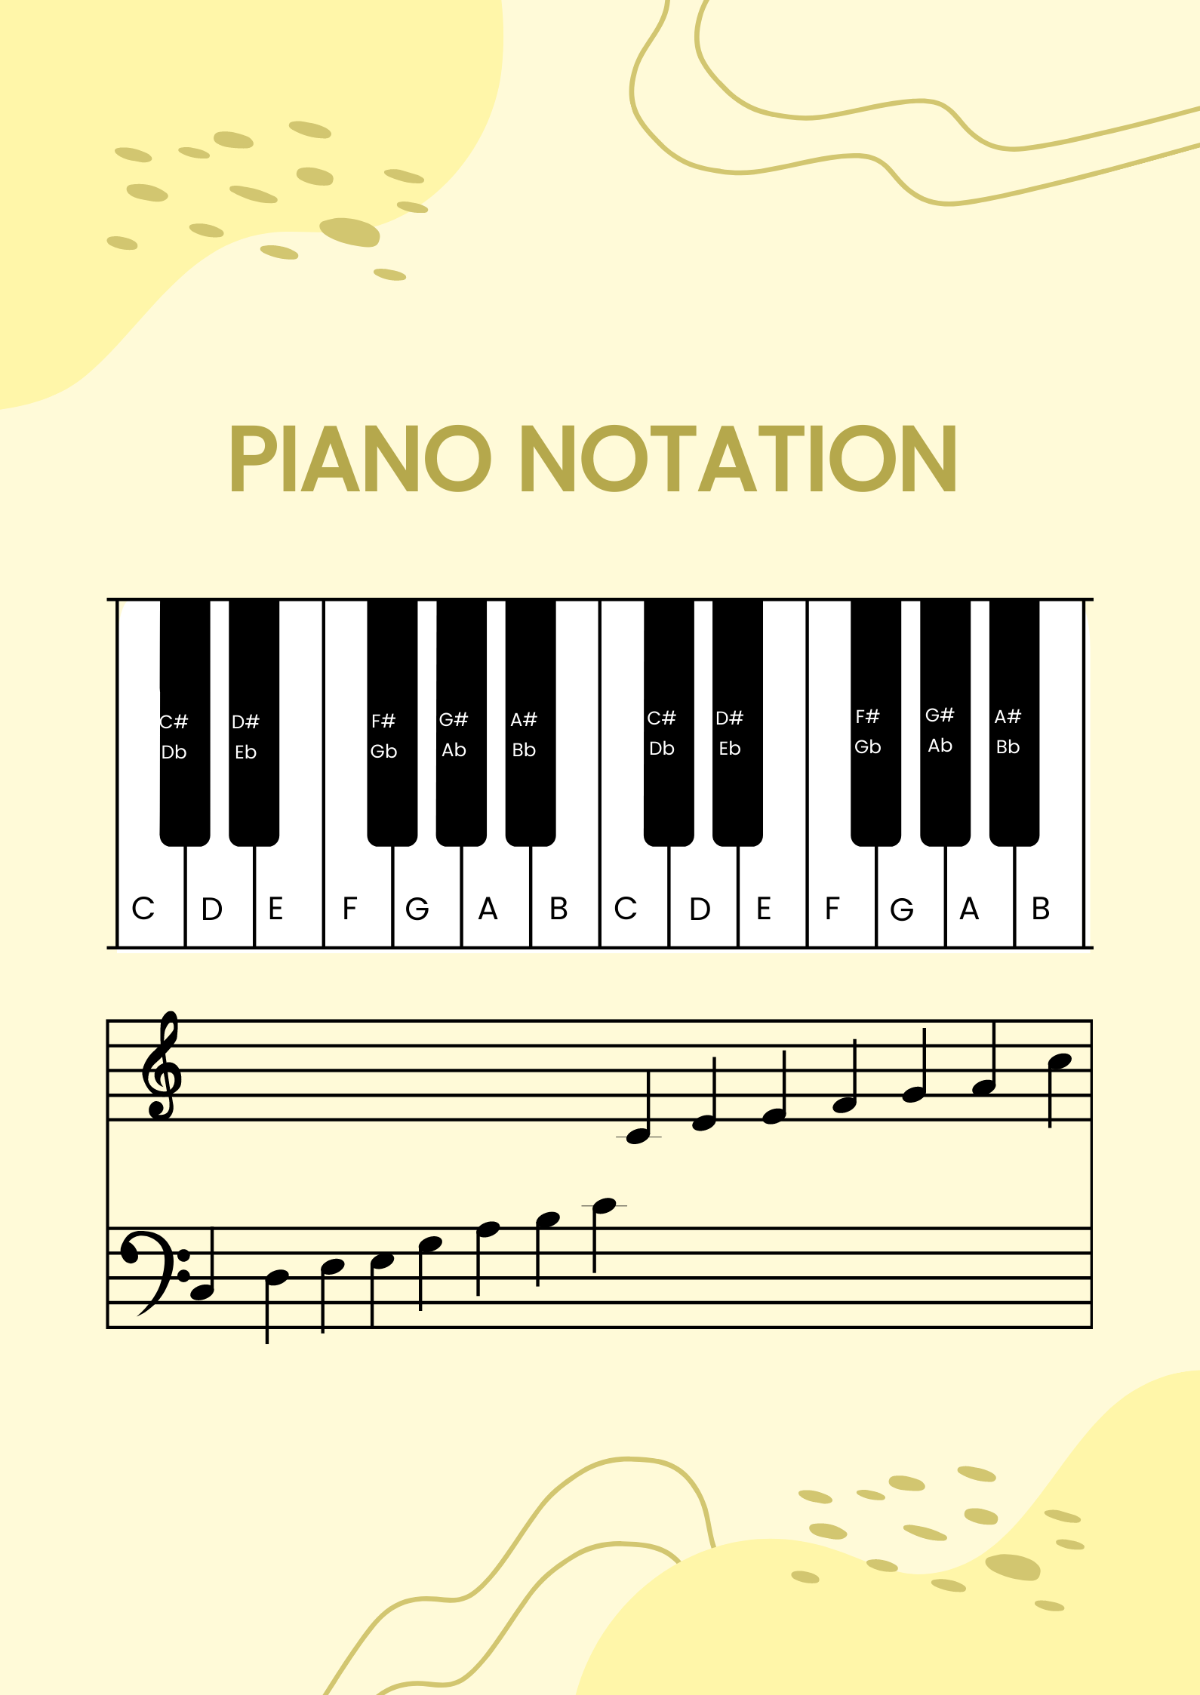 Piano Notation Chart Template